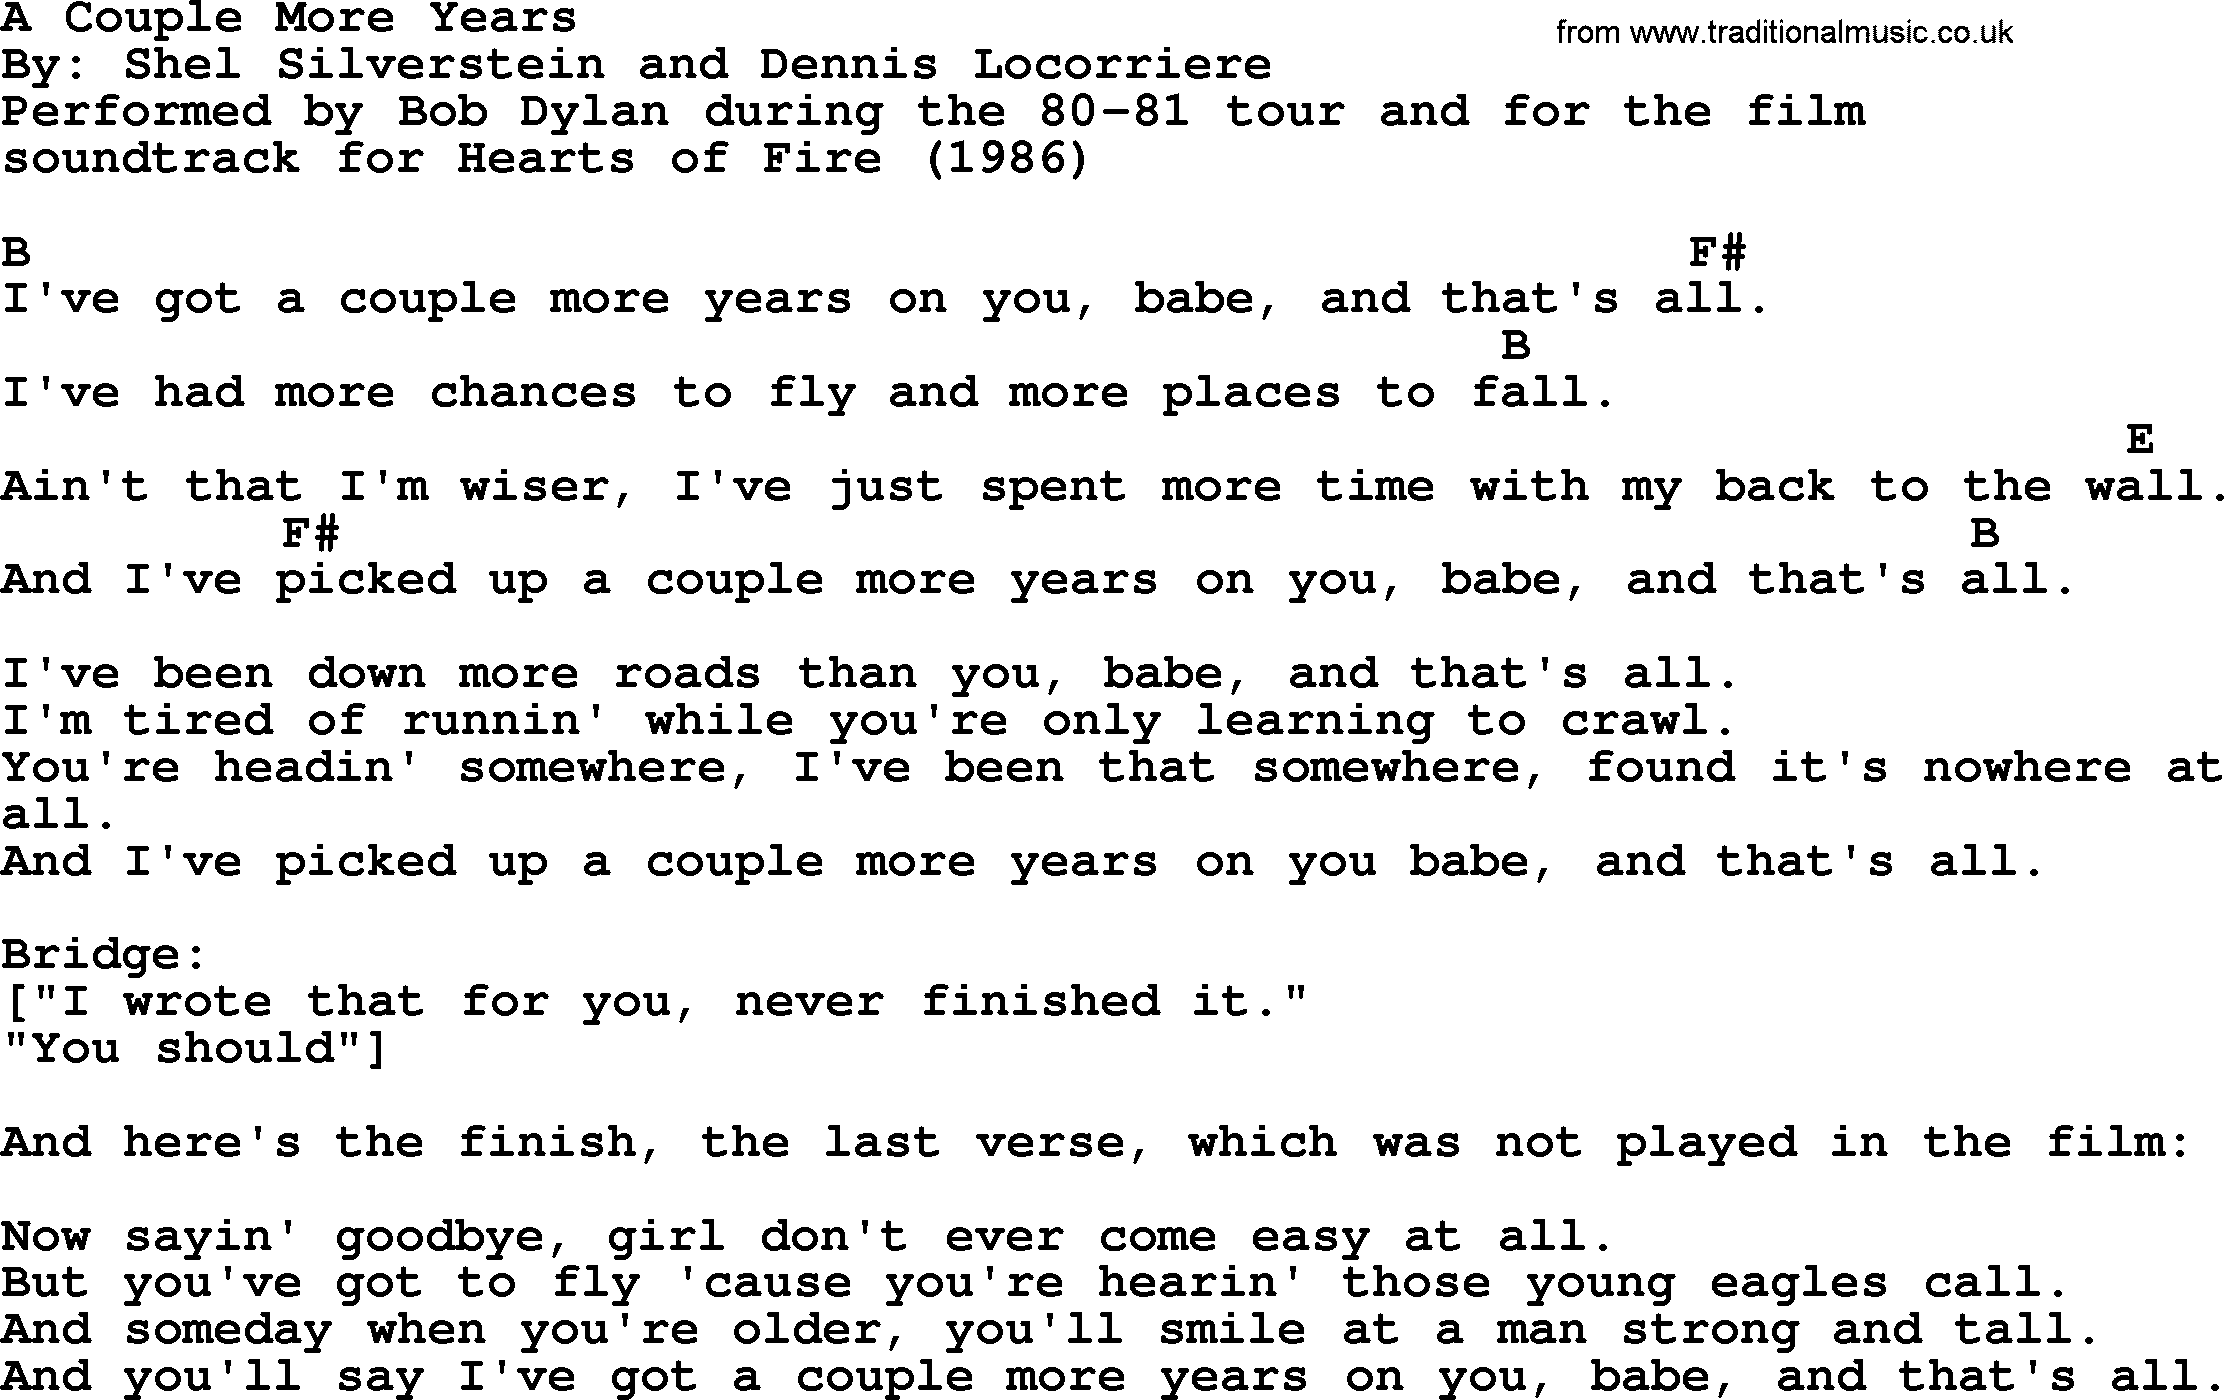 Bob Dylan song, lyrics with chords - A Couple More Years